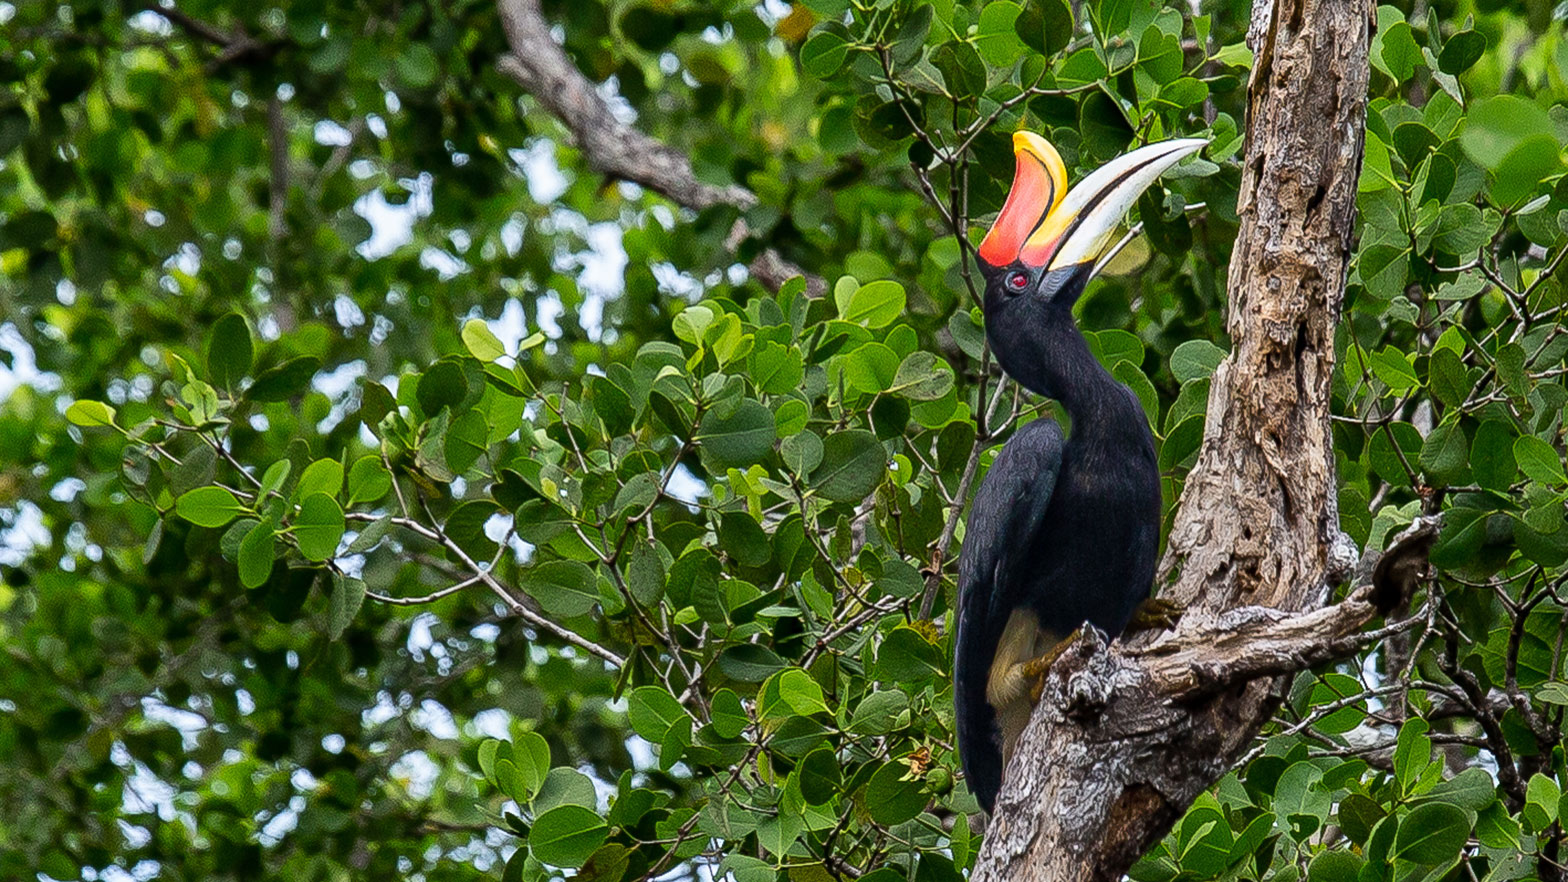 A rhinoceros hornbill is one of the many species that call the mangrove forest home.     Photo courtesy of Pact.